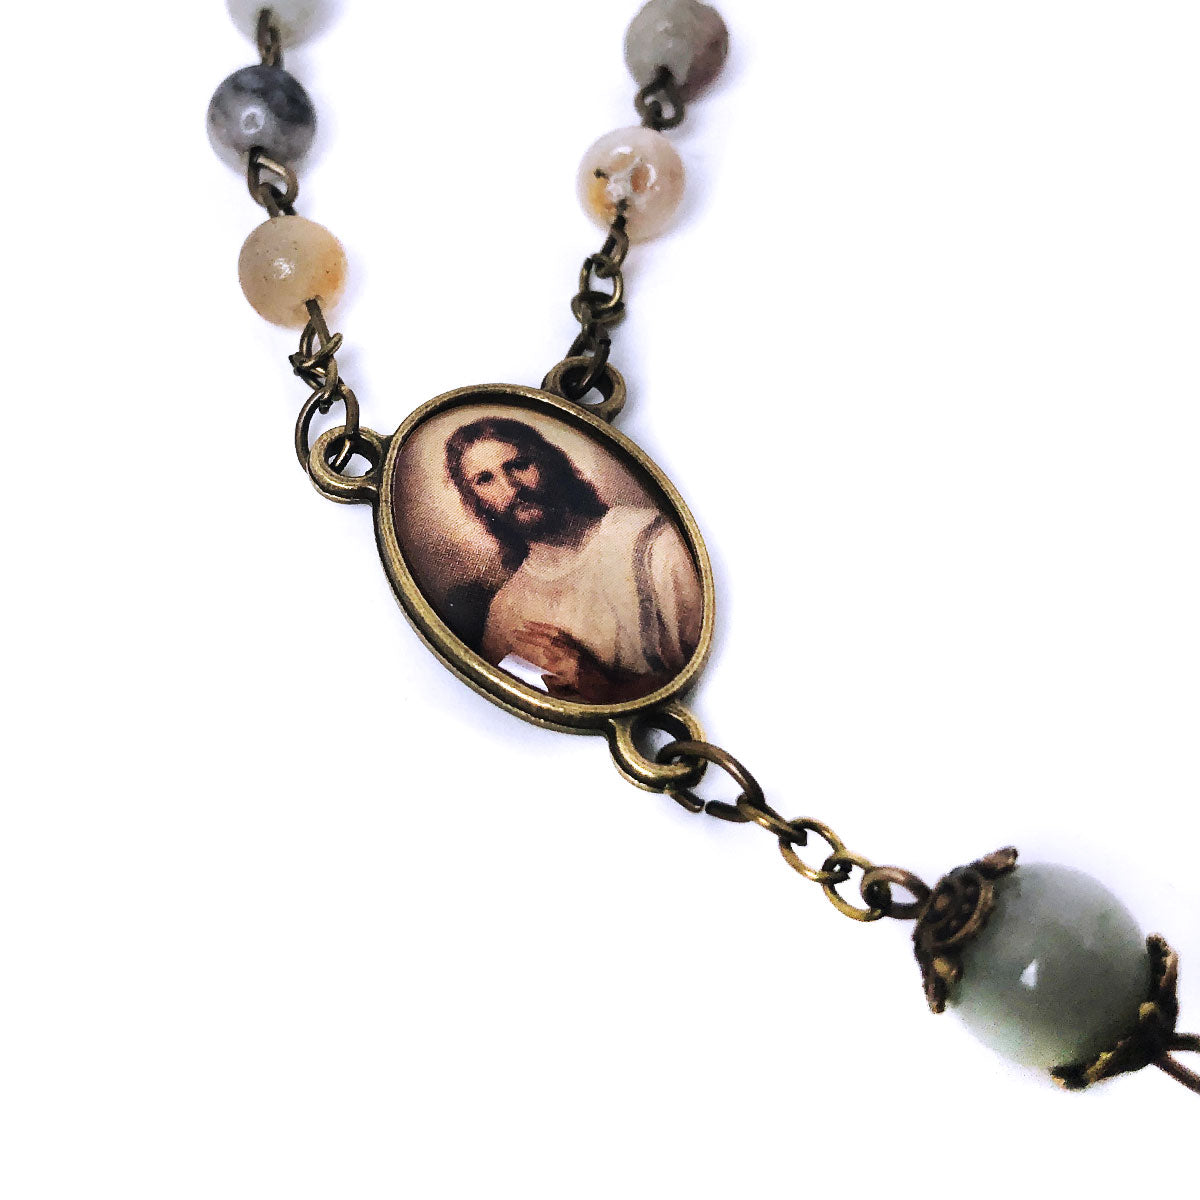 Jesus Christ Amazonite Stone Rosary and Rosary Bracelet Set by Catholic Heirlooms - Confirmation - Holy Communion Gift - Rosary Necklace